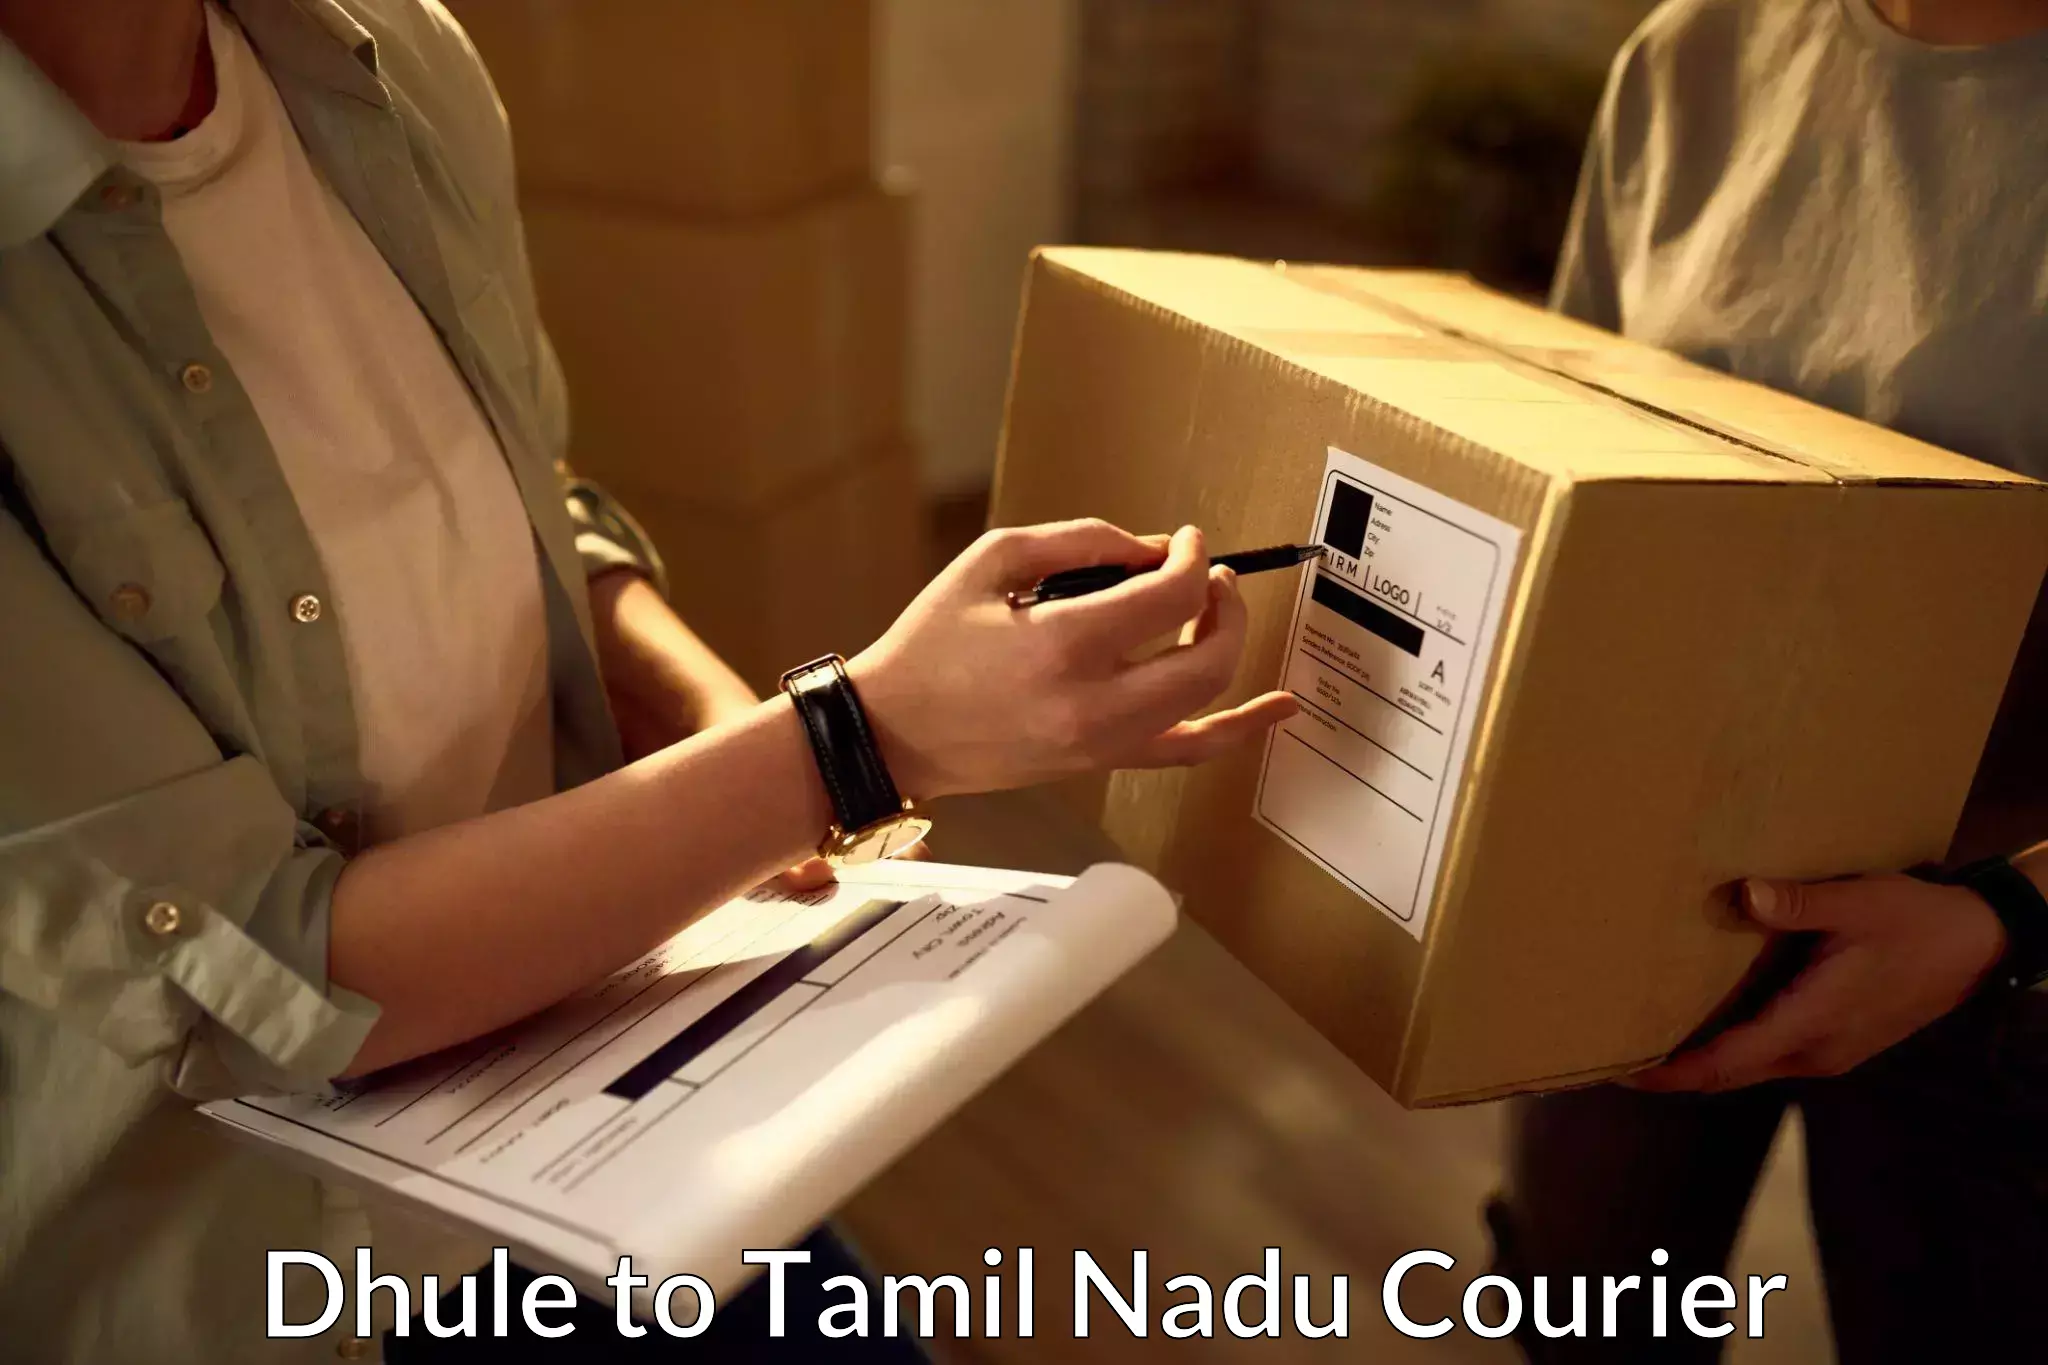 Round-the-clock parcel delivery Dhule to Ennore Port Chennai